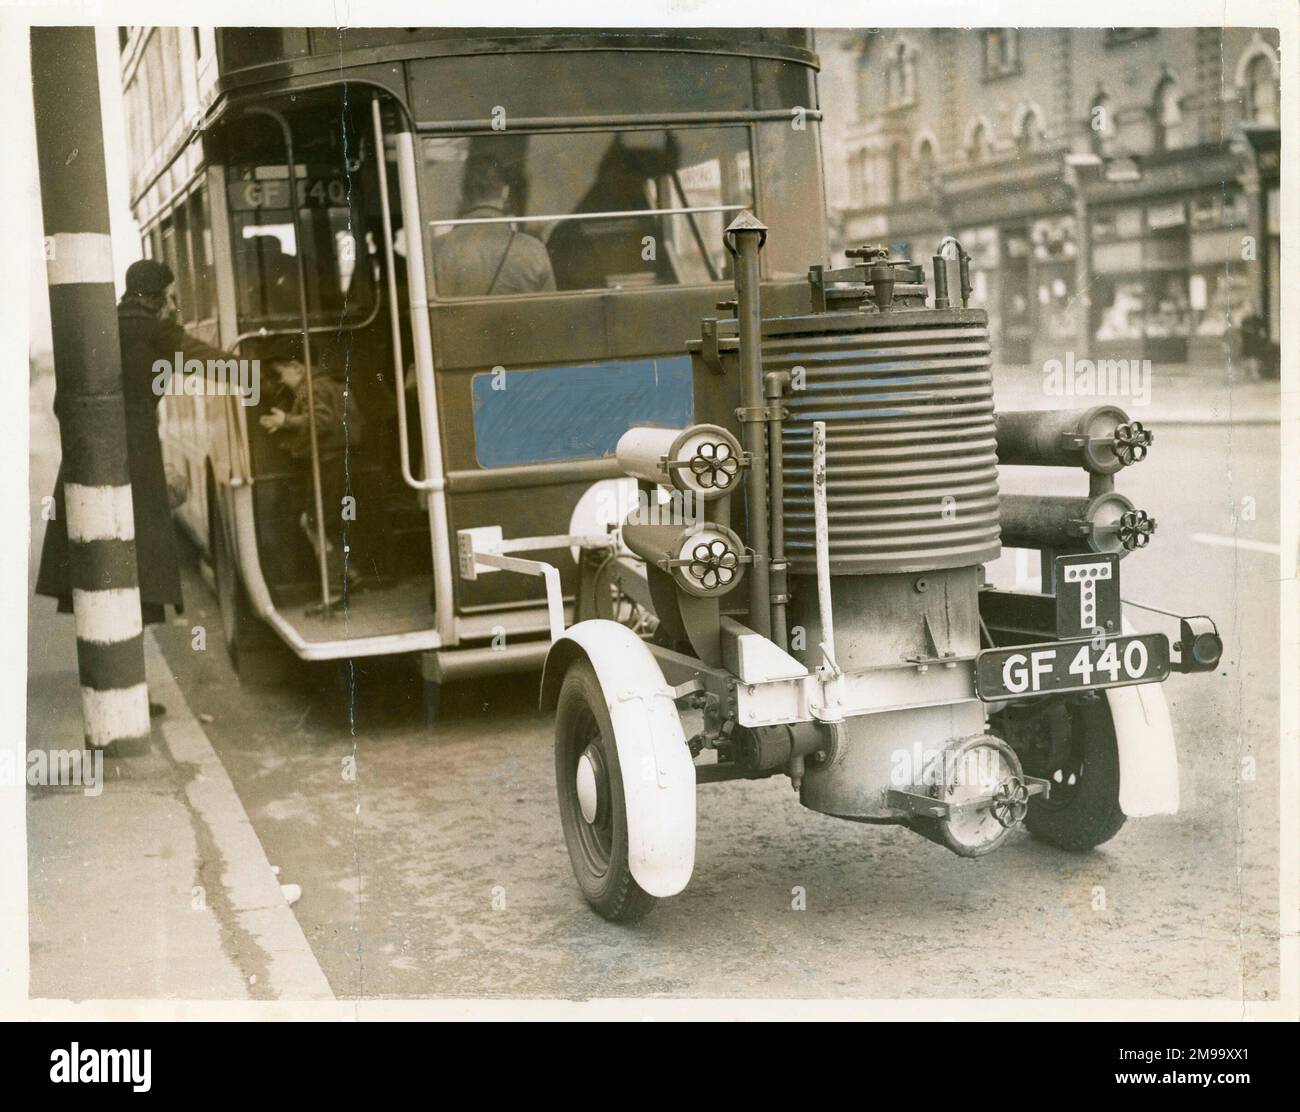 Gas Bus 'the first one [in photo] was in public service between Kingston and Epsom Downs yesterday [2 Nov 1939]. Towed by the bus, the trailer produces gas from a stove burning solid fules, which is passed to the engine through a thick hose.' Stock Photo